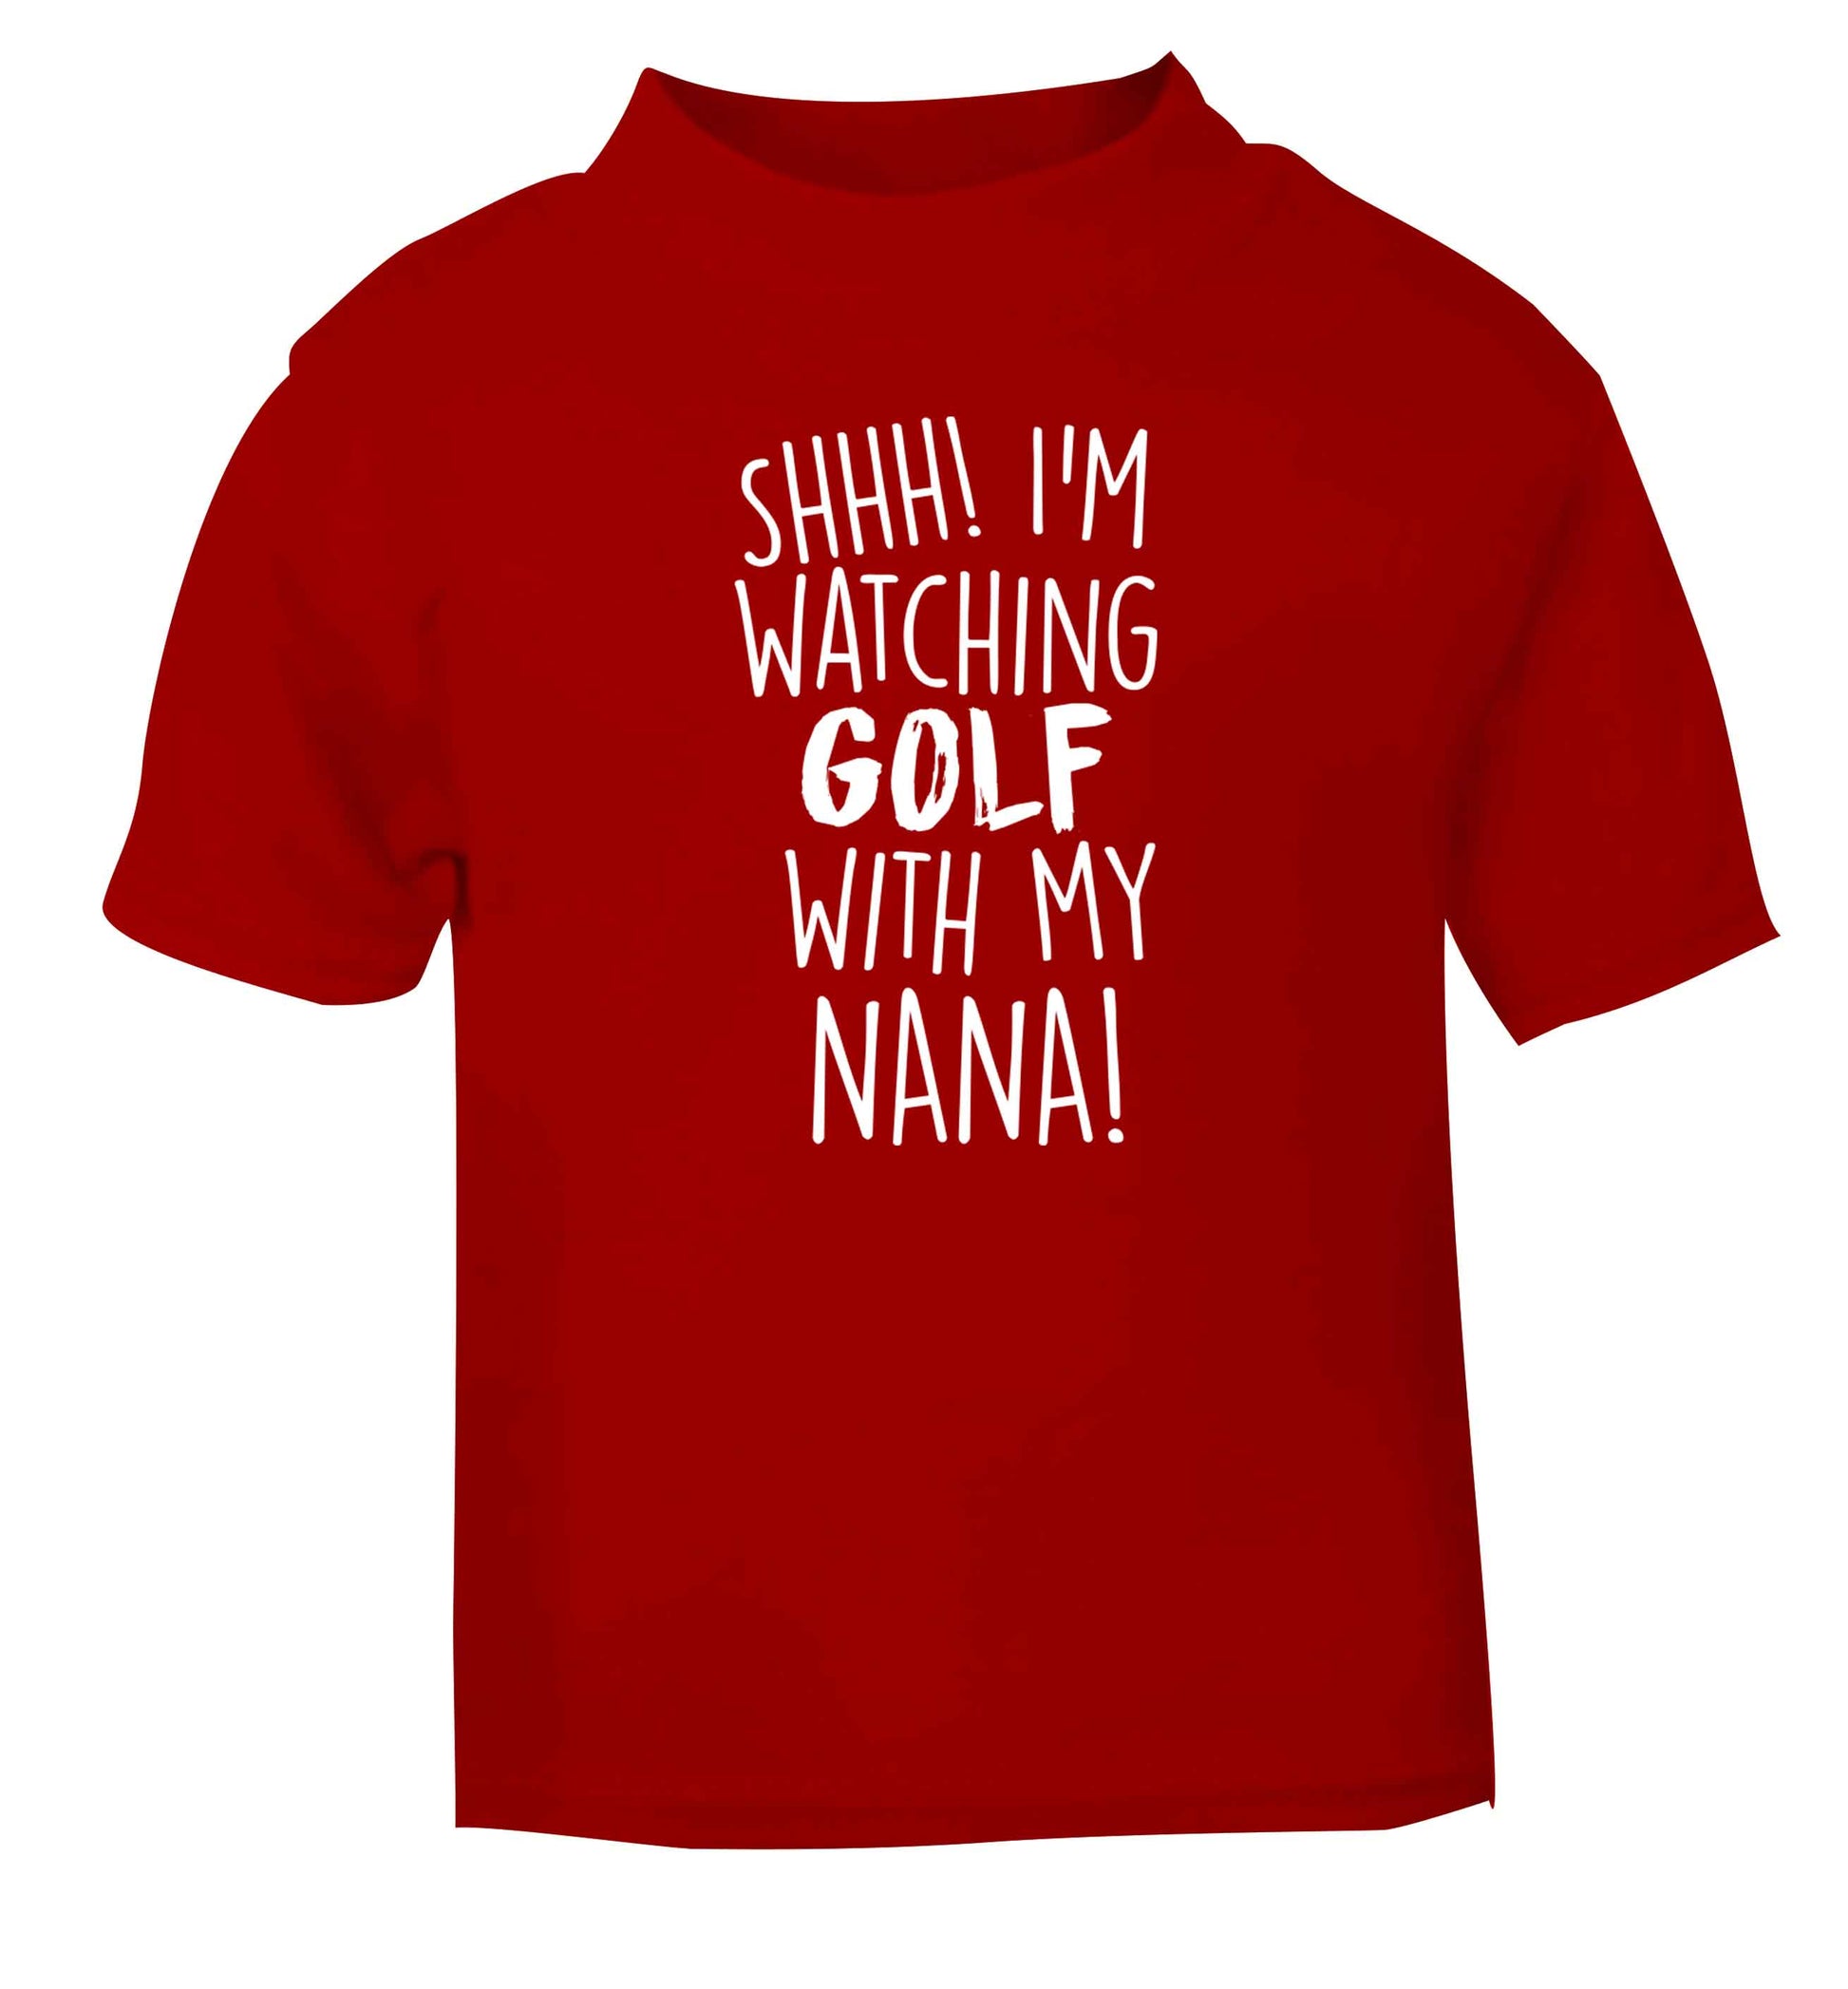 Shh I'm watching golf with my nana red Baby Toddler Tshirt 2 Years